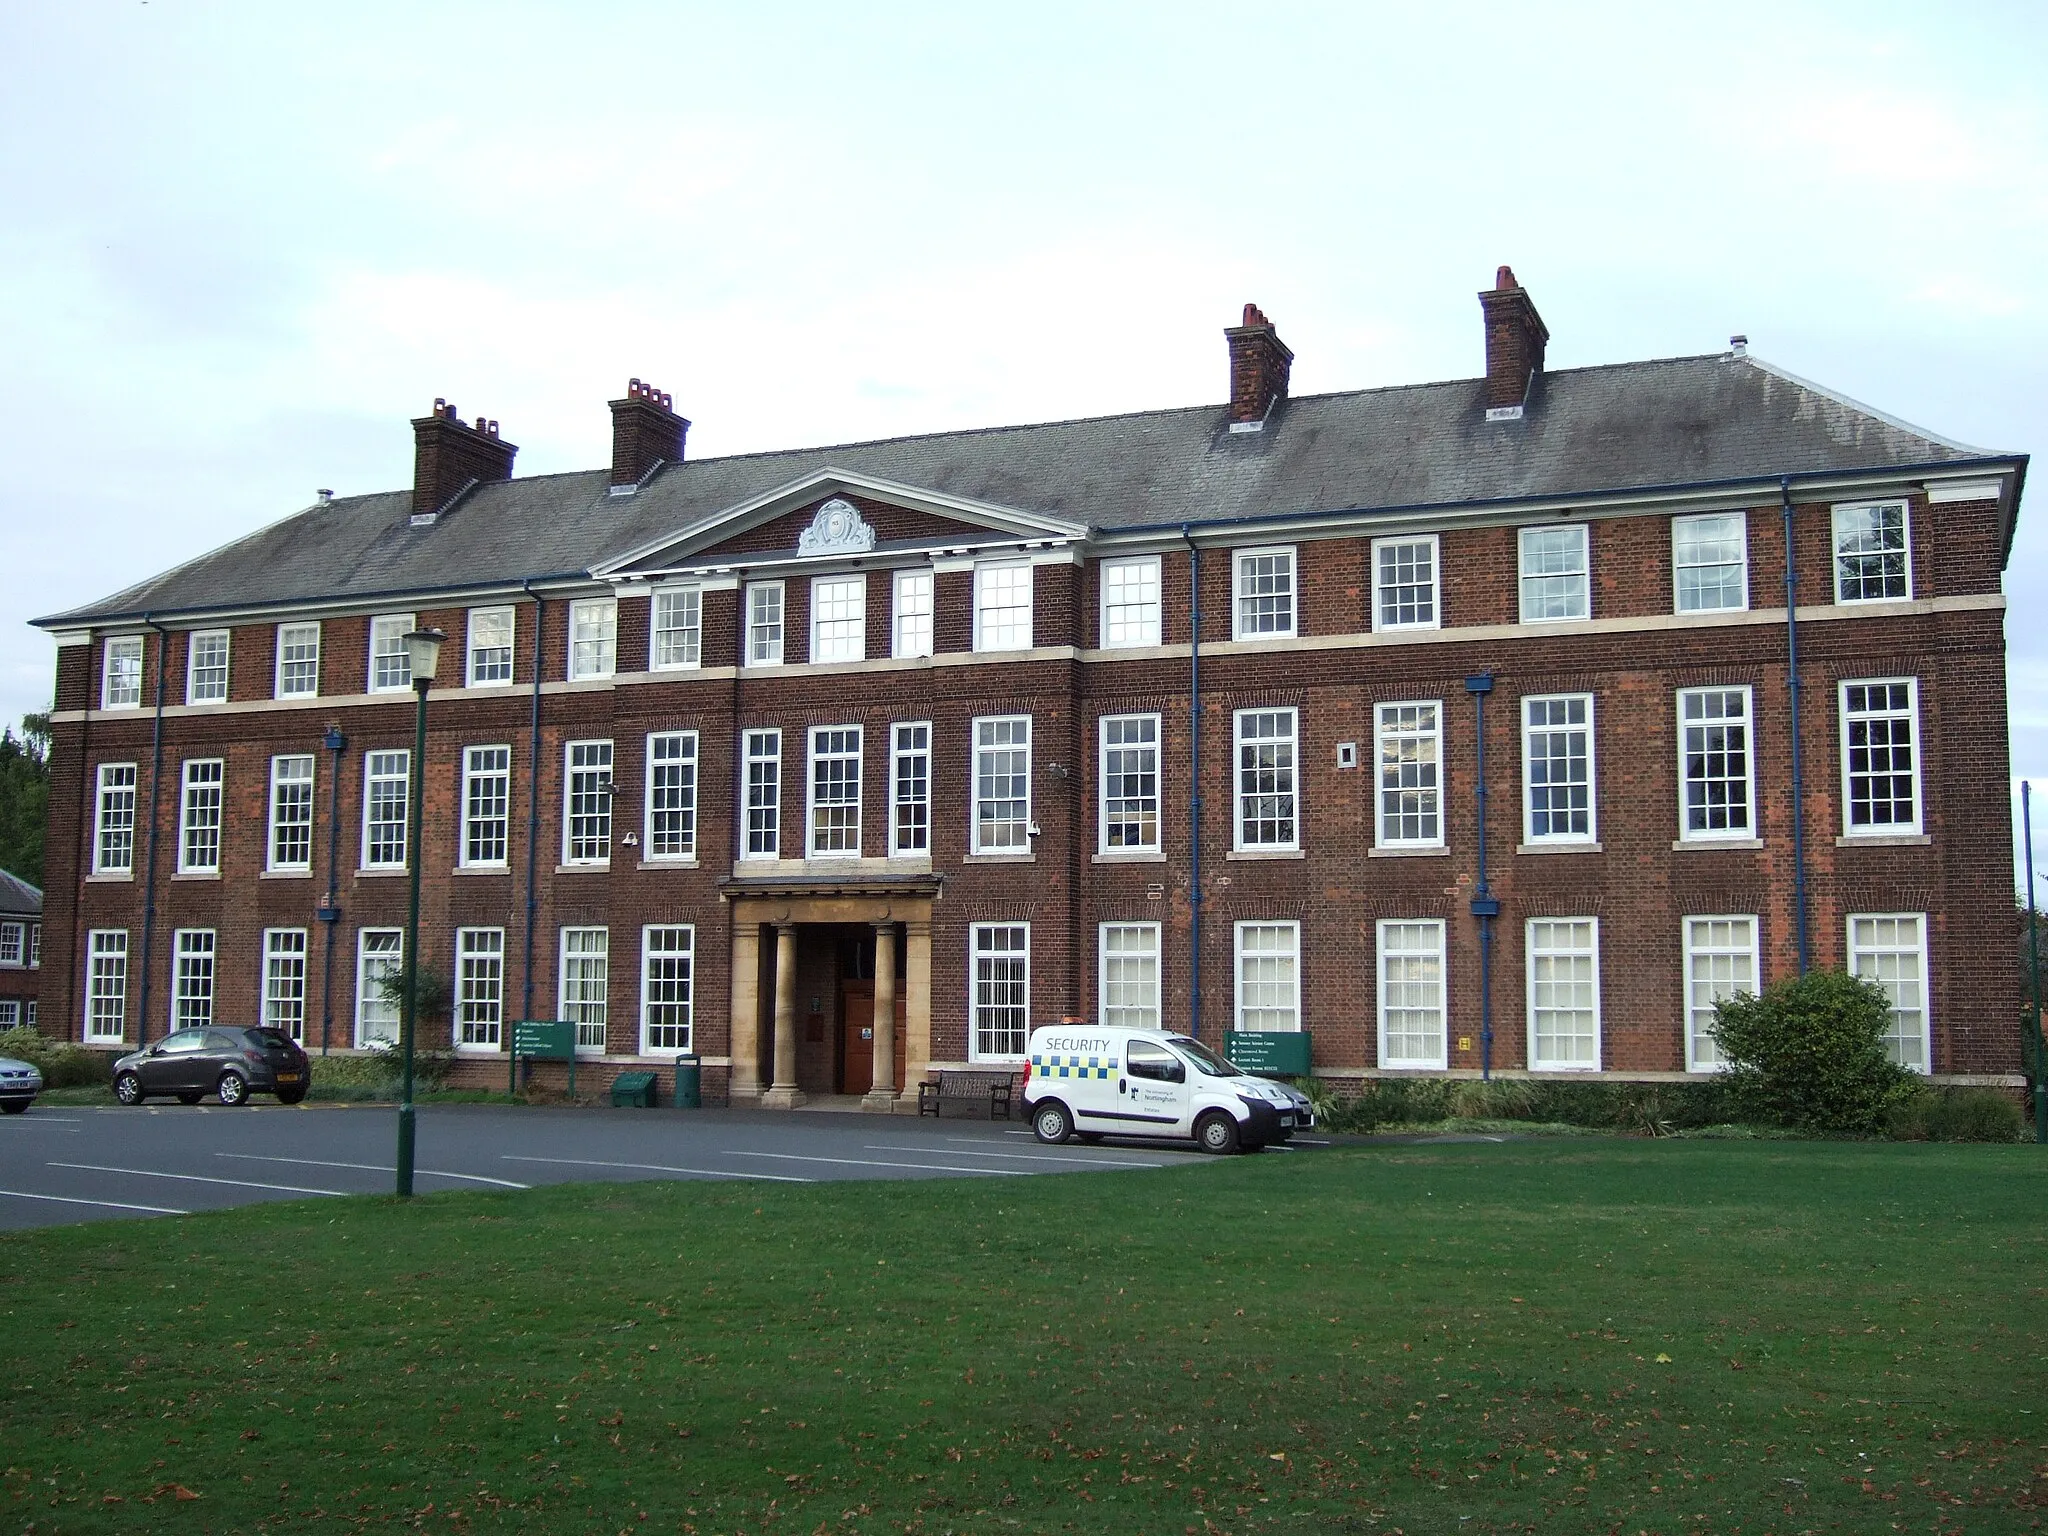 Photo showing: The main building (and oldest) on the Sutton Bonington University of Nottingham Campus, England, in 2011.